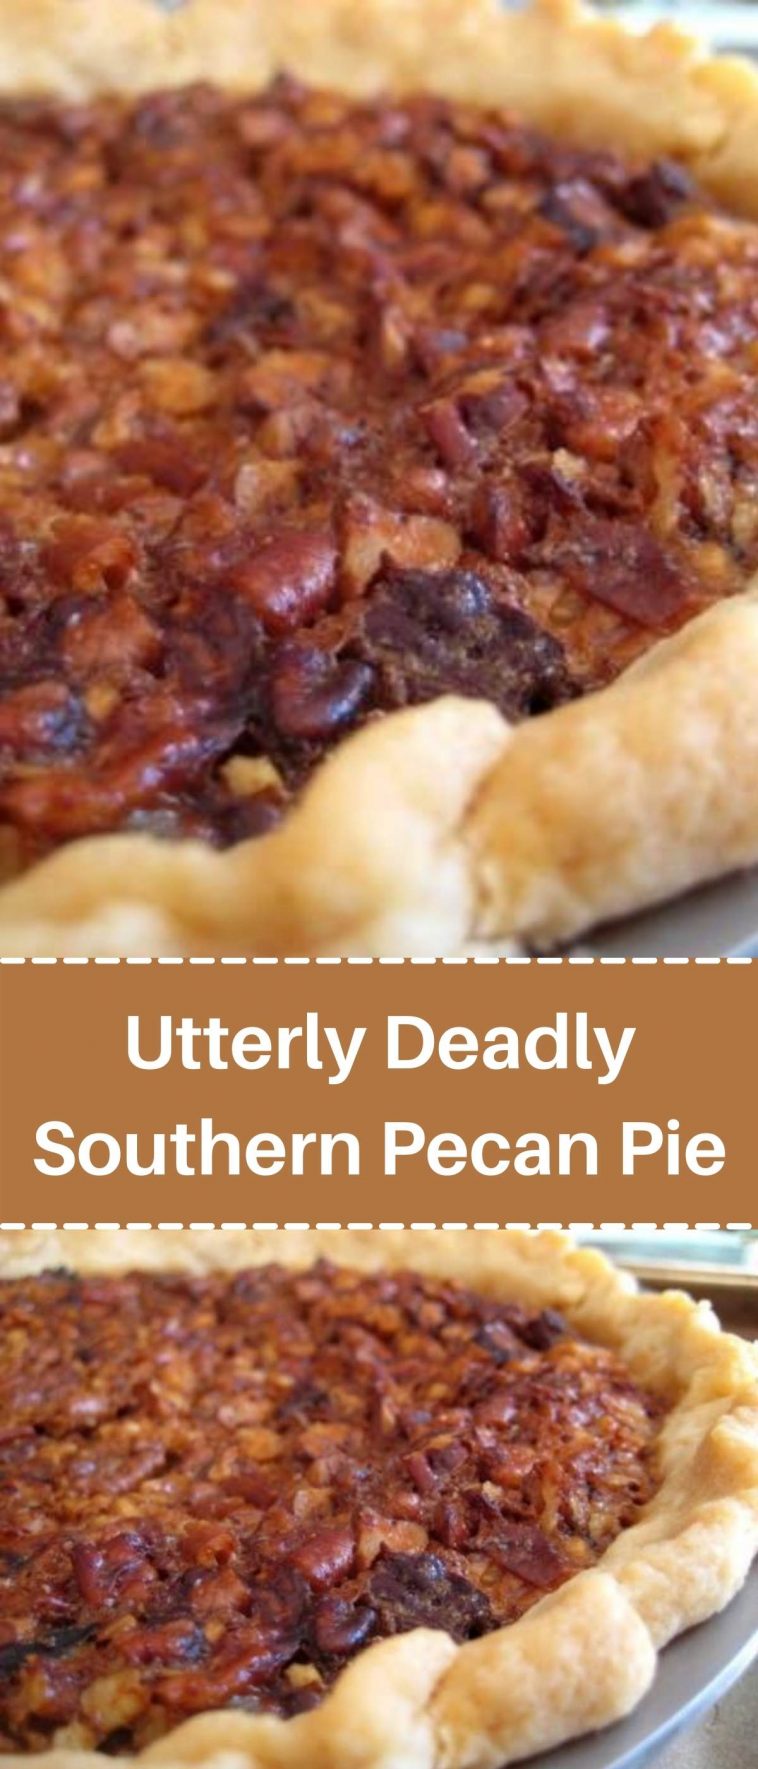 Utterly Deadly Southern Pecan Pie